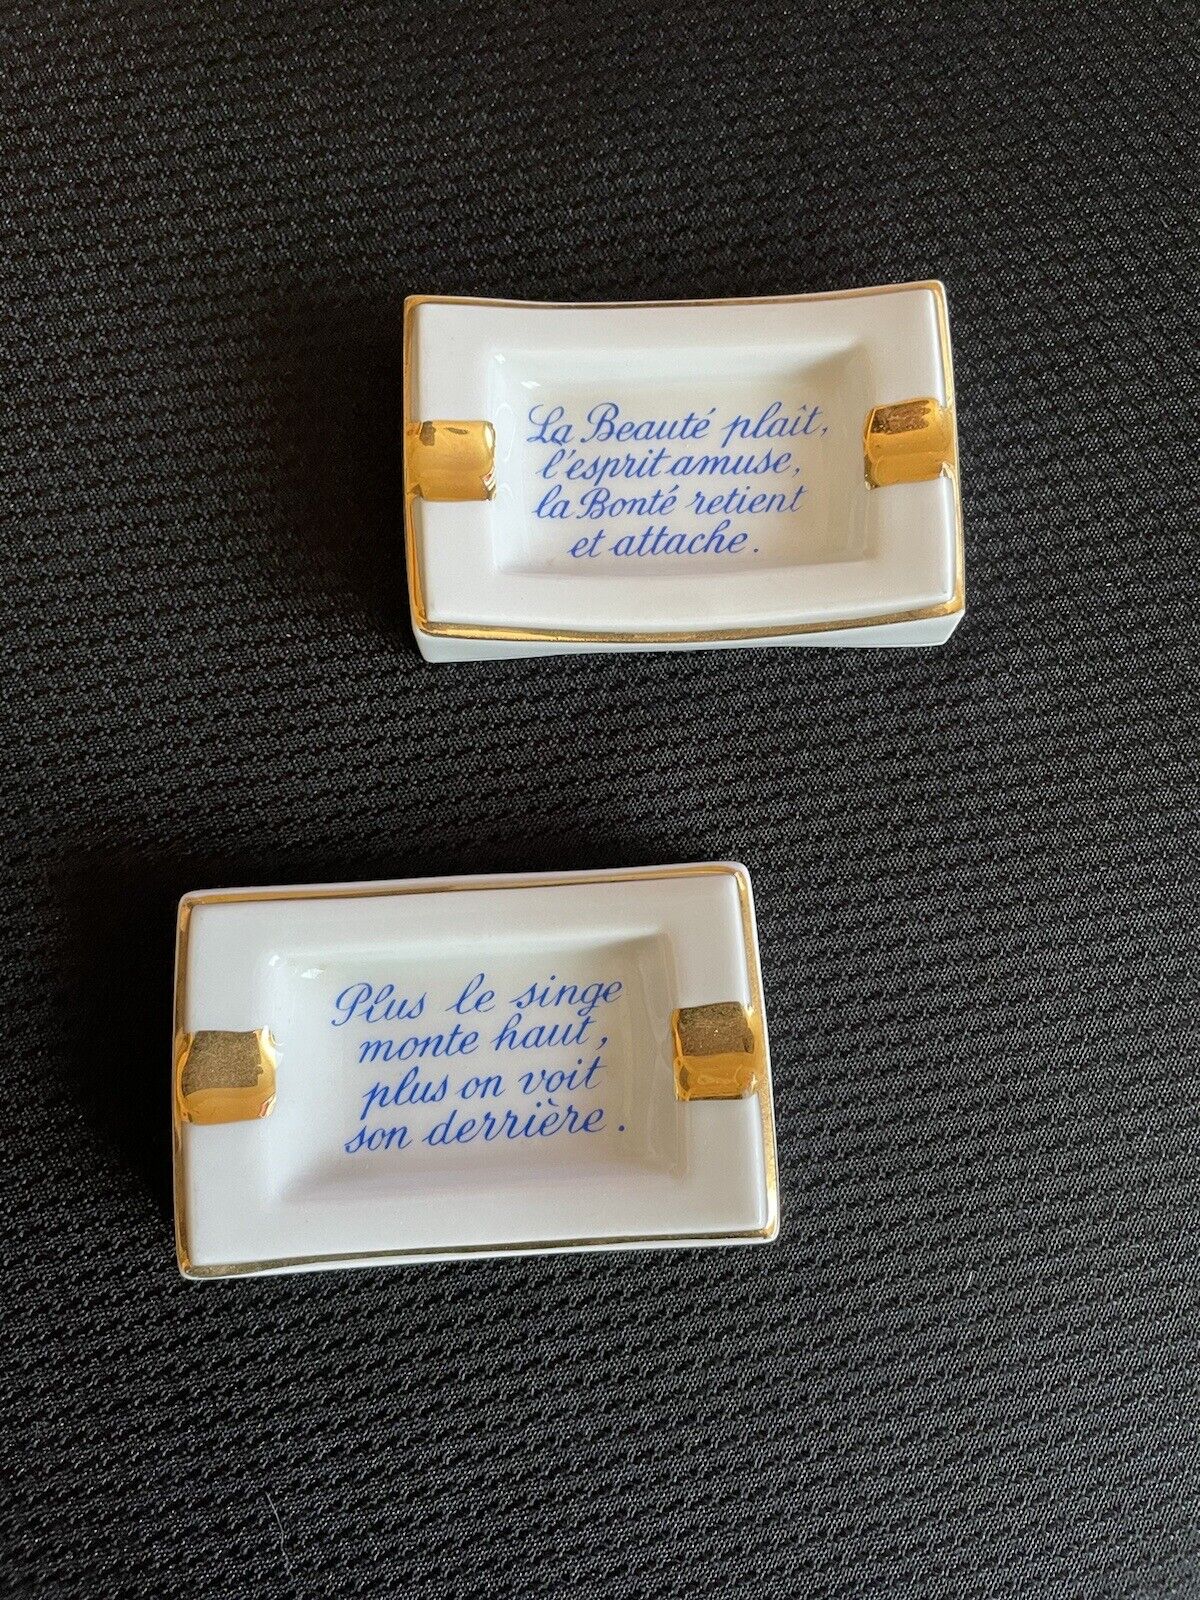 2 Limoges France Porcelain Small Ashtrays With Gold Trim